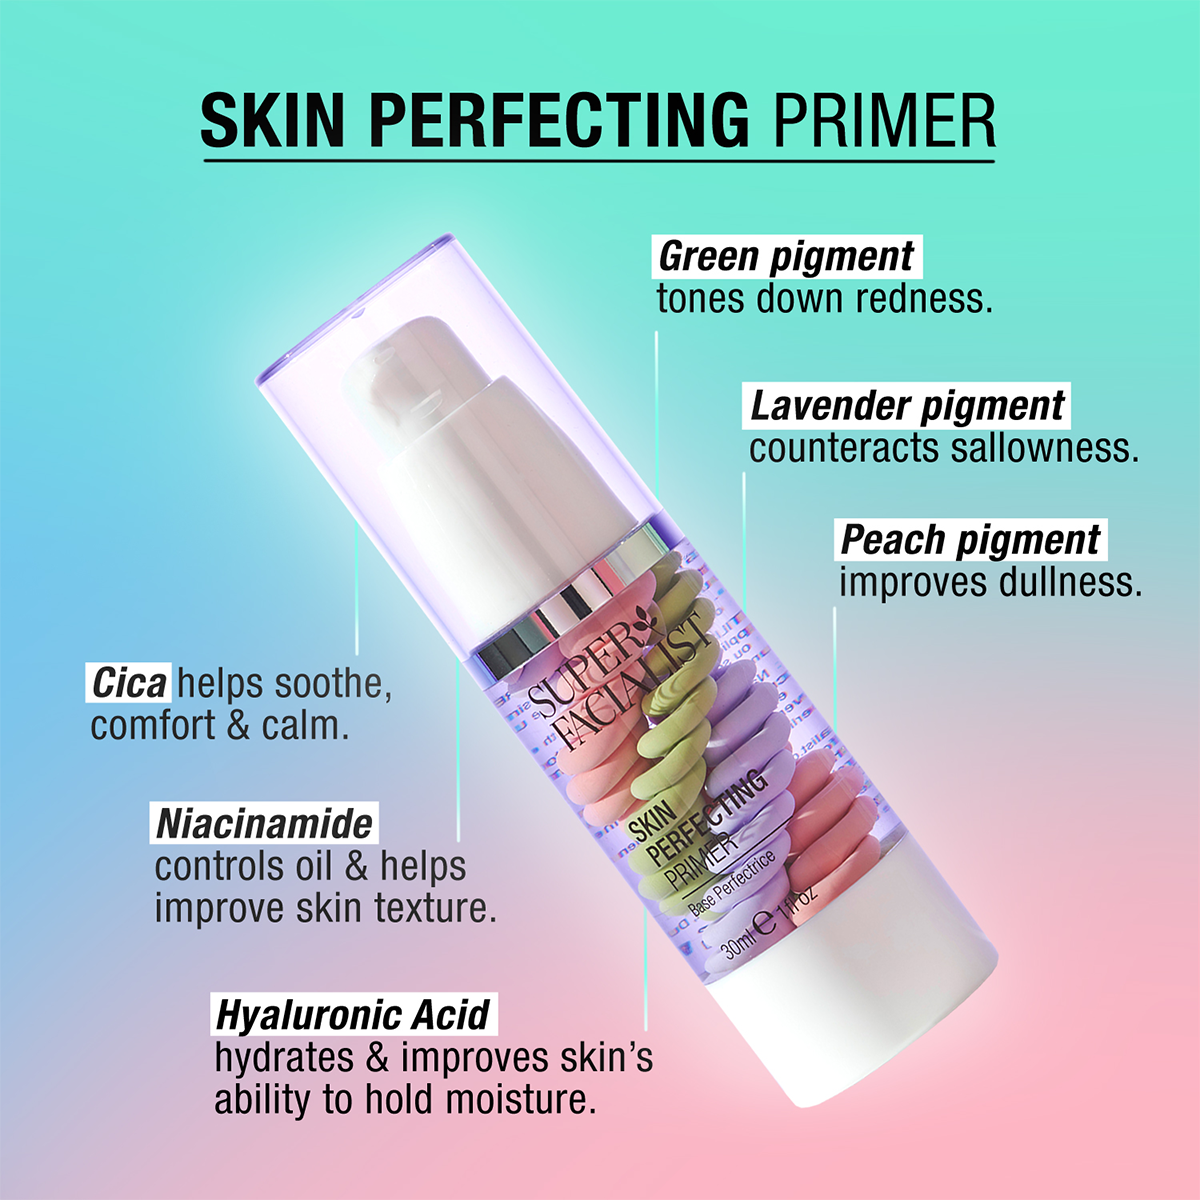 
              Skin perfecting primer,
              cica helps soothe, comfort and calm,
              green pigment tones down redness,
              niacinamide controls oil and helps improve skin texture, hyaluronic acid hydrates and improves skin's ability to hold moisture,
              lavender pigment counteracts sallowness,
              peach pigment improves dullness 
              